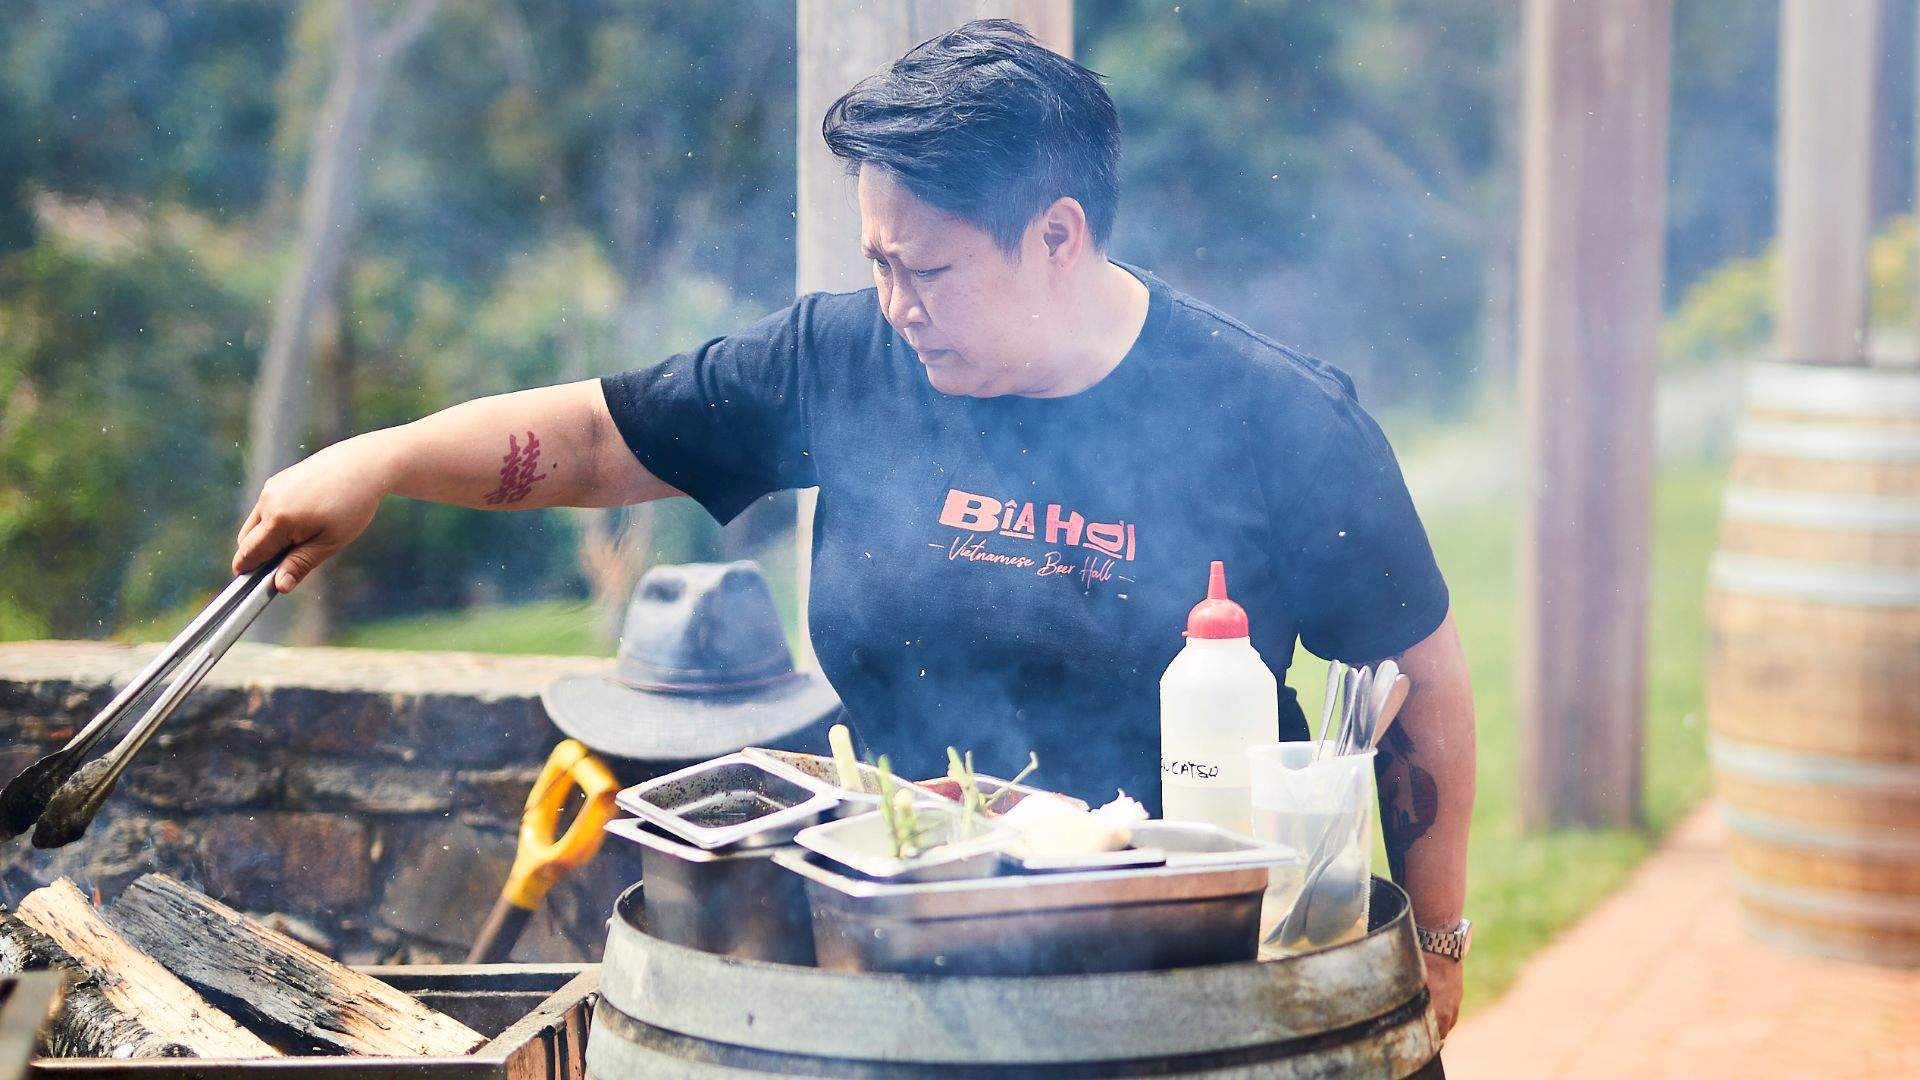 Jerry Mai and Friends' Epic Summer Barbecue Celebration